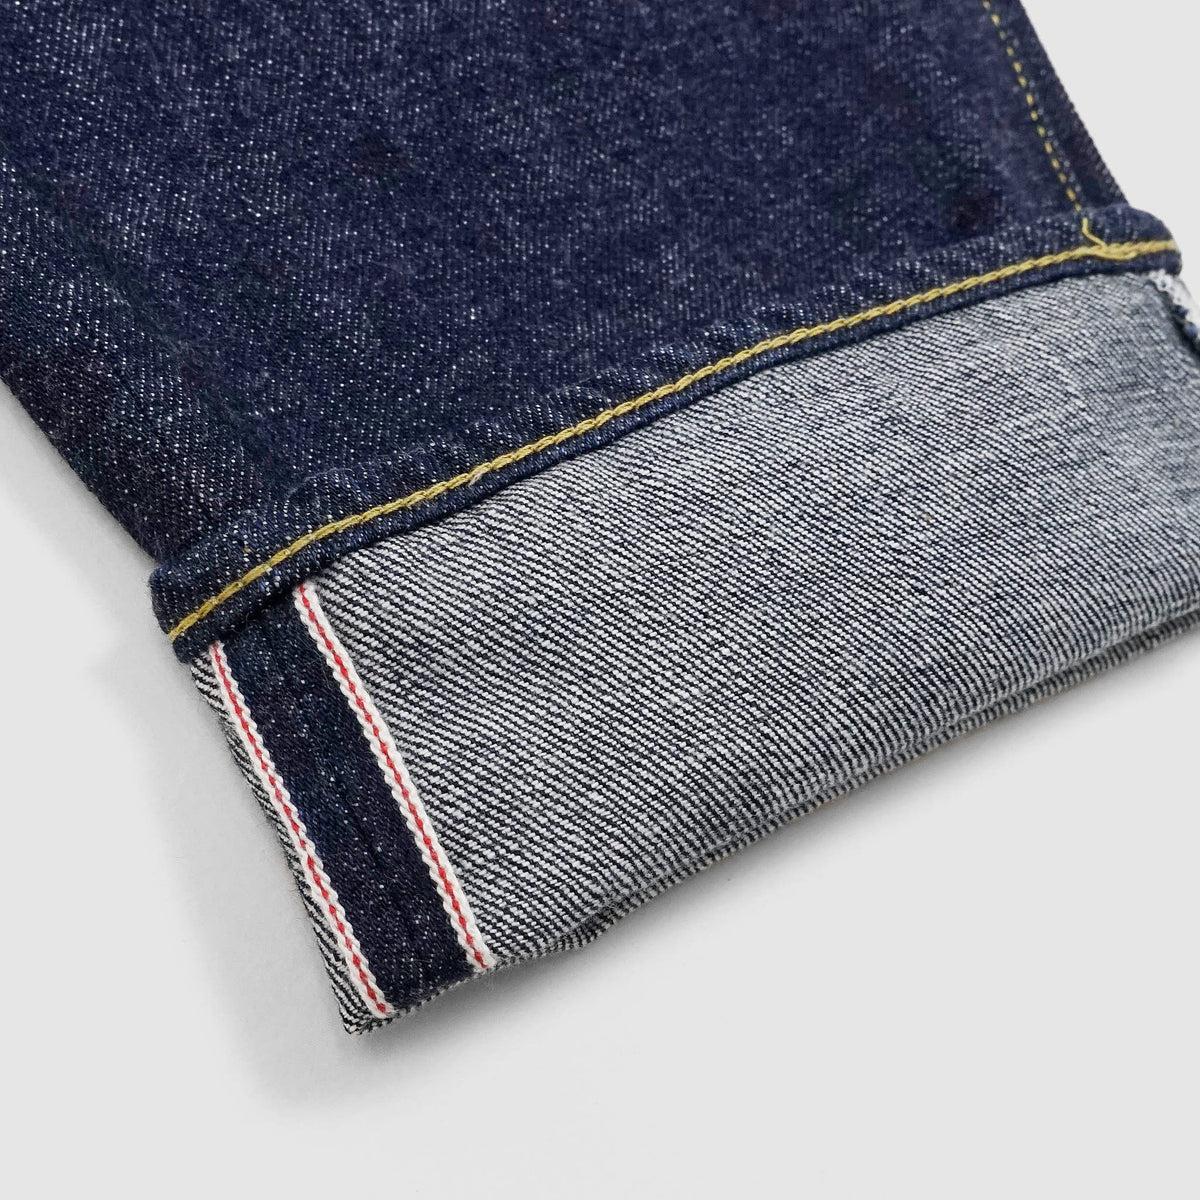 Cee Jeanss &amp; Co. Basic Selvage Denim Jeans